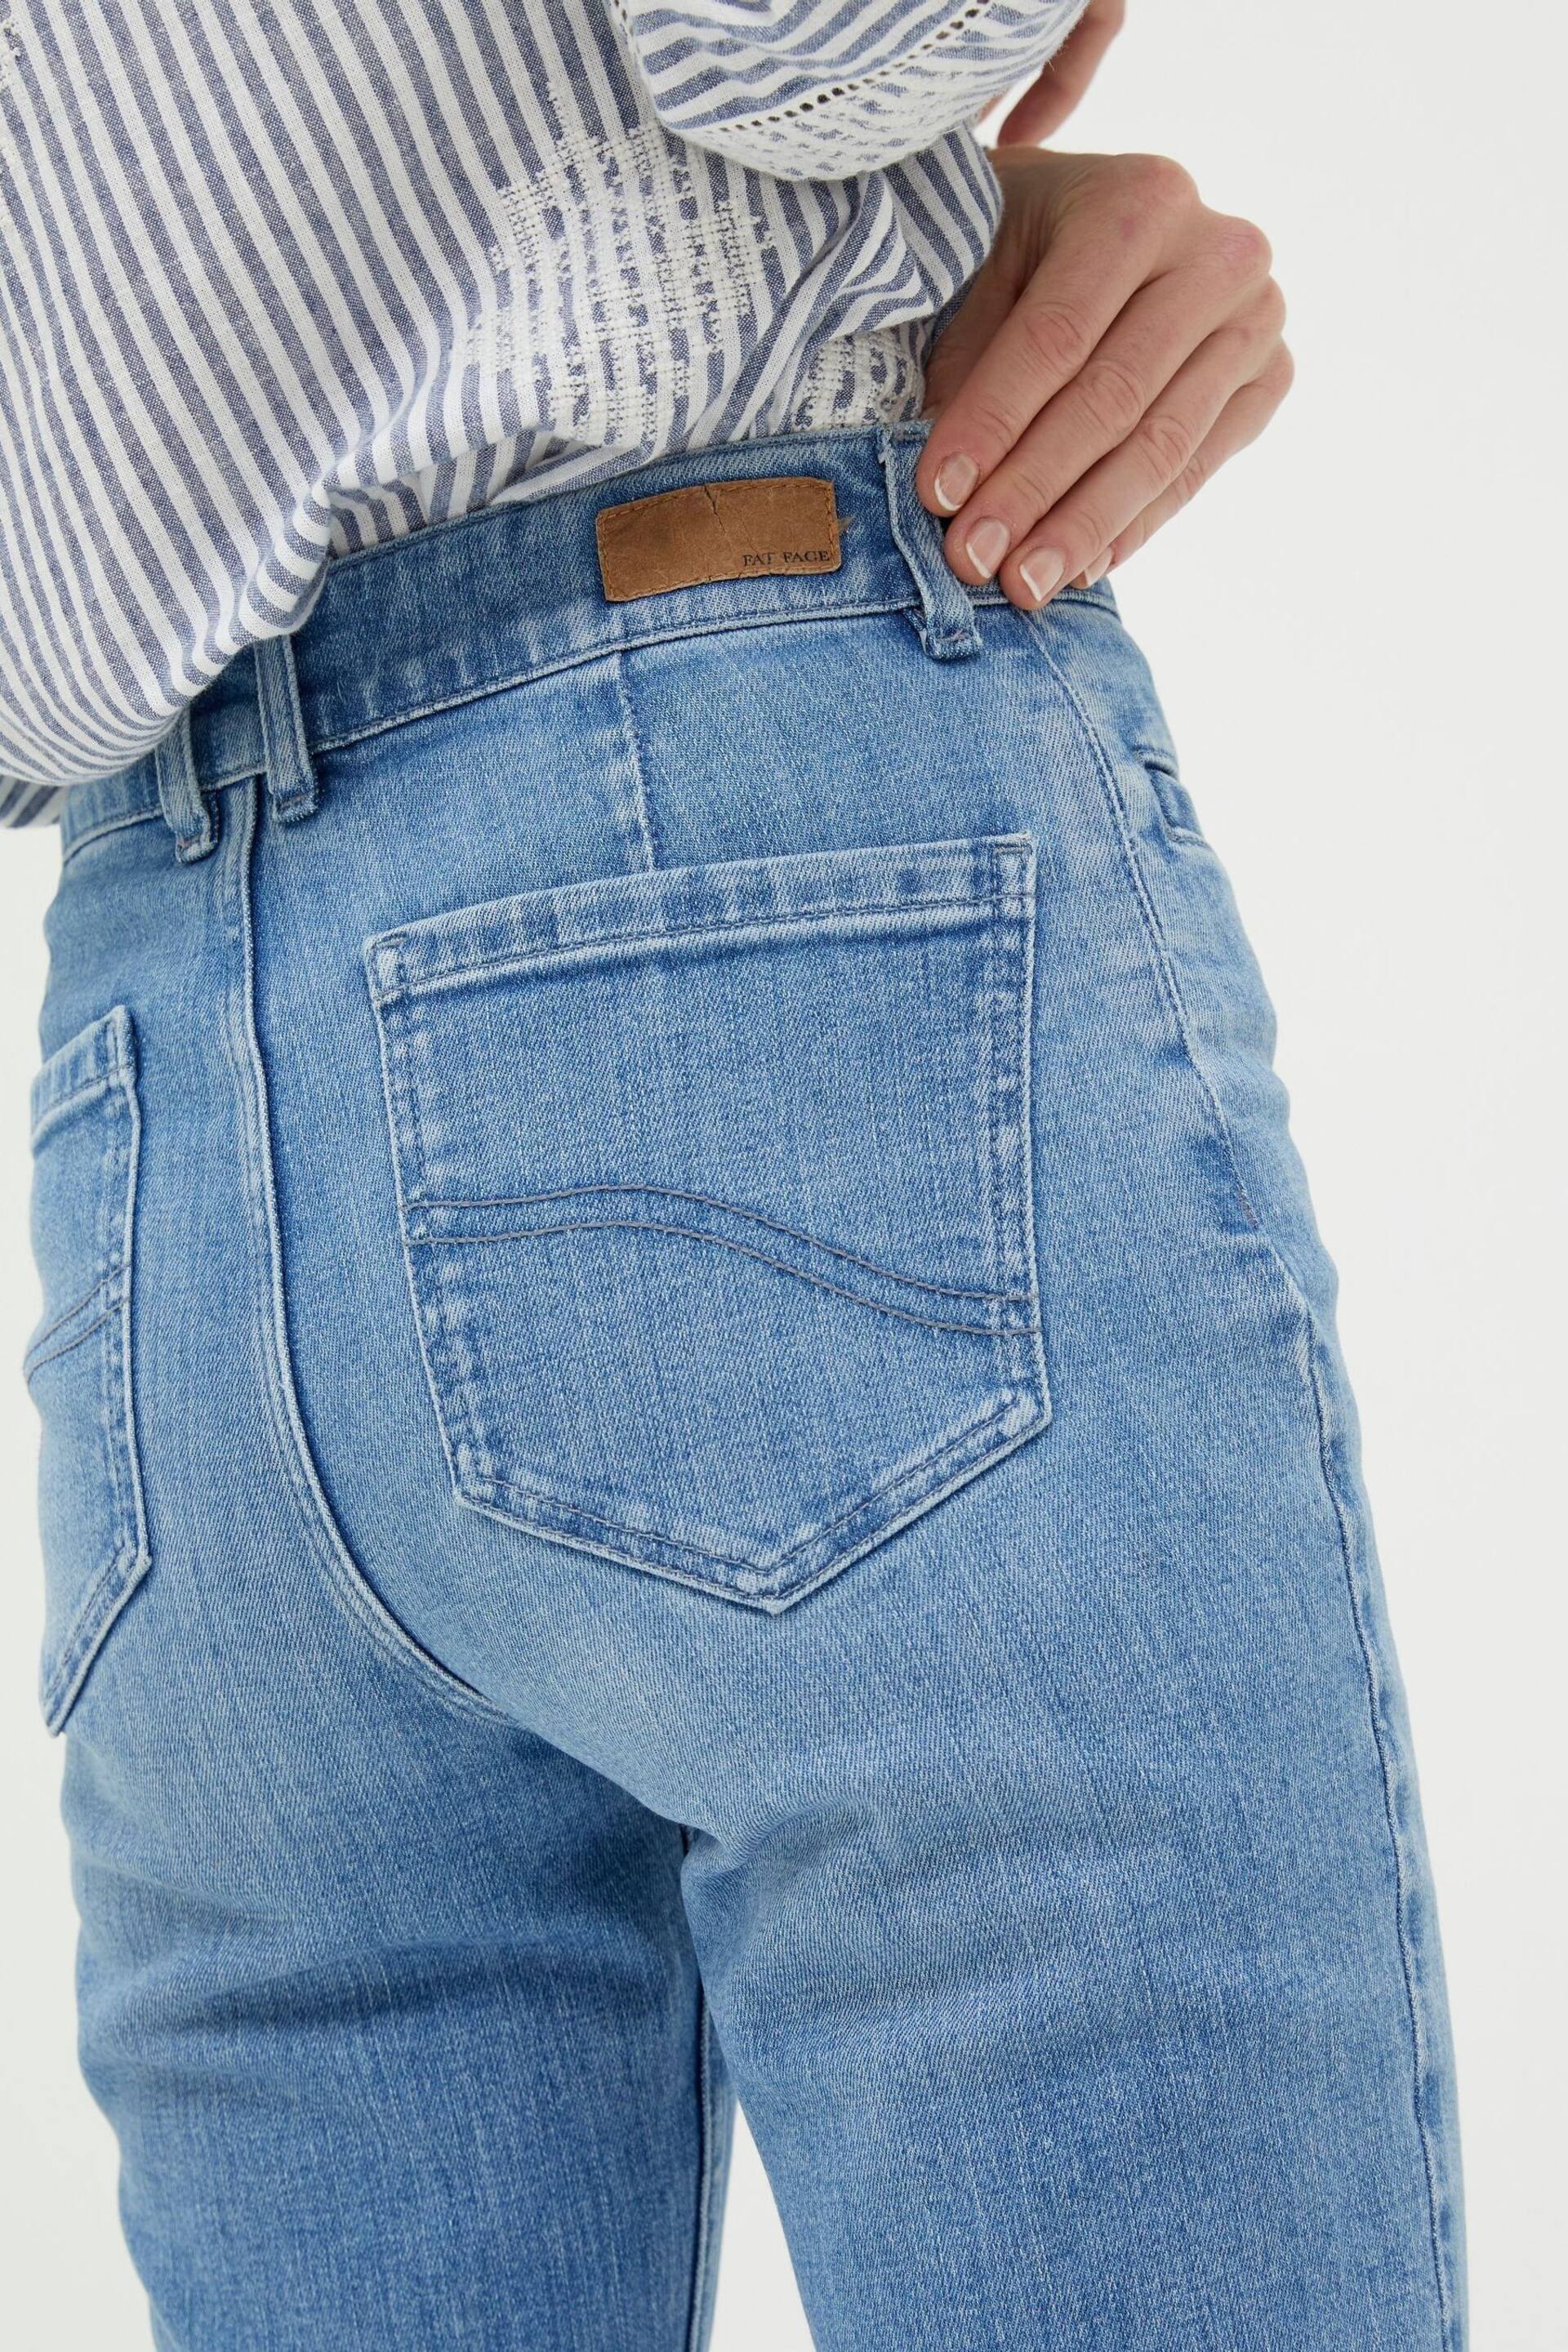 FatFace Blue Fly Flare Jeans - Image 4 of 6